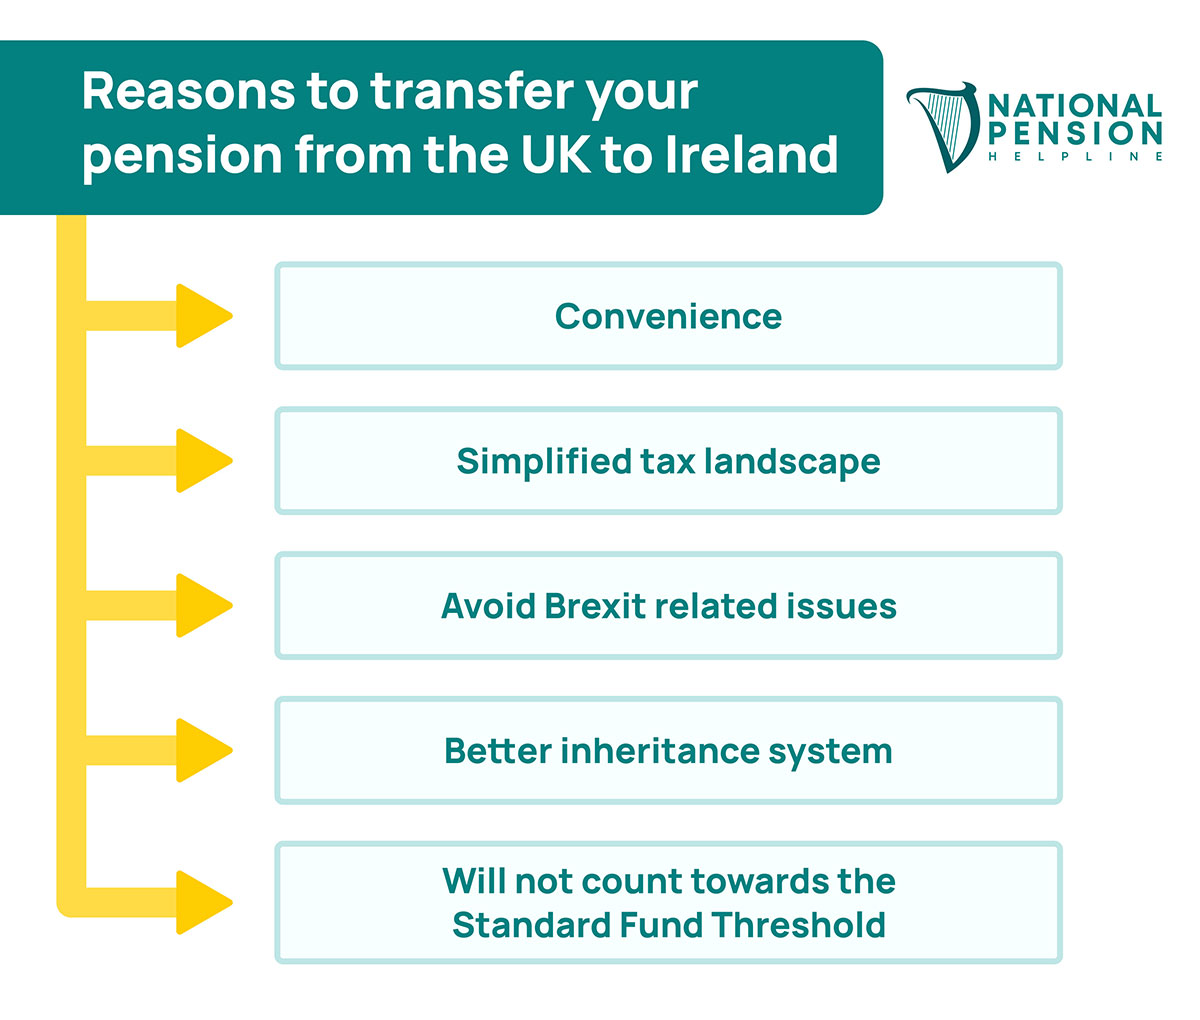 Your options when transferring your pension to ireland from the UK